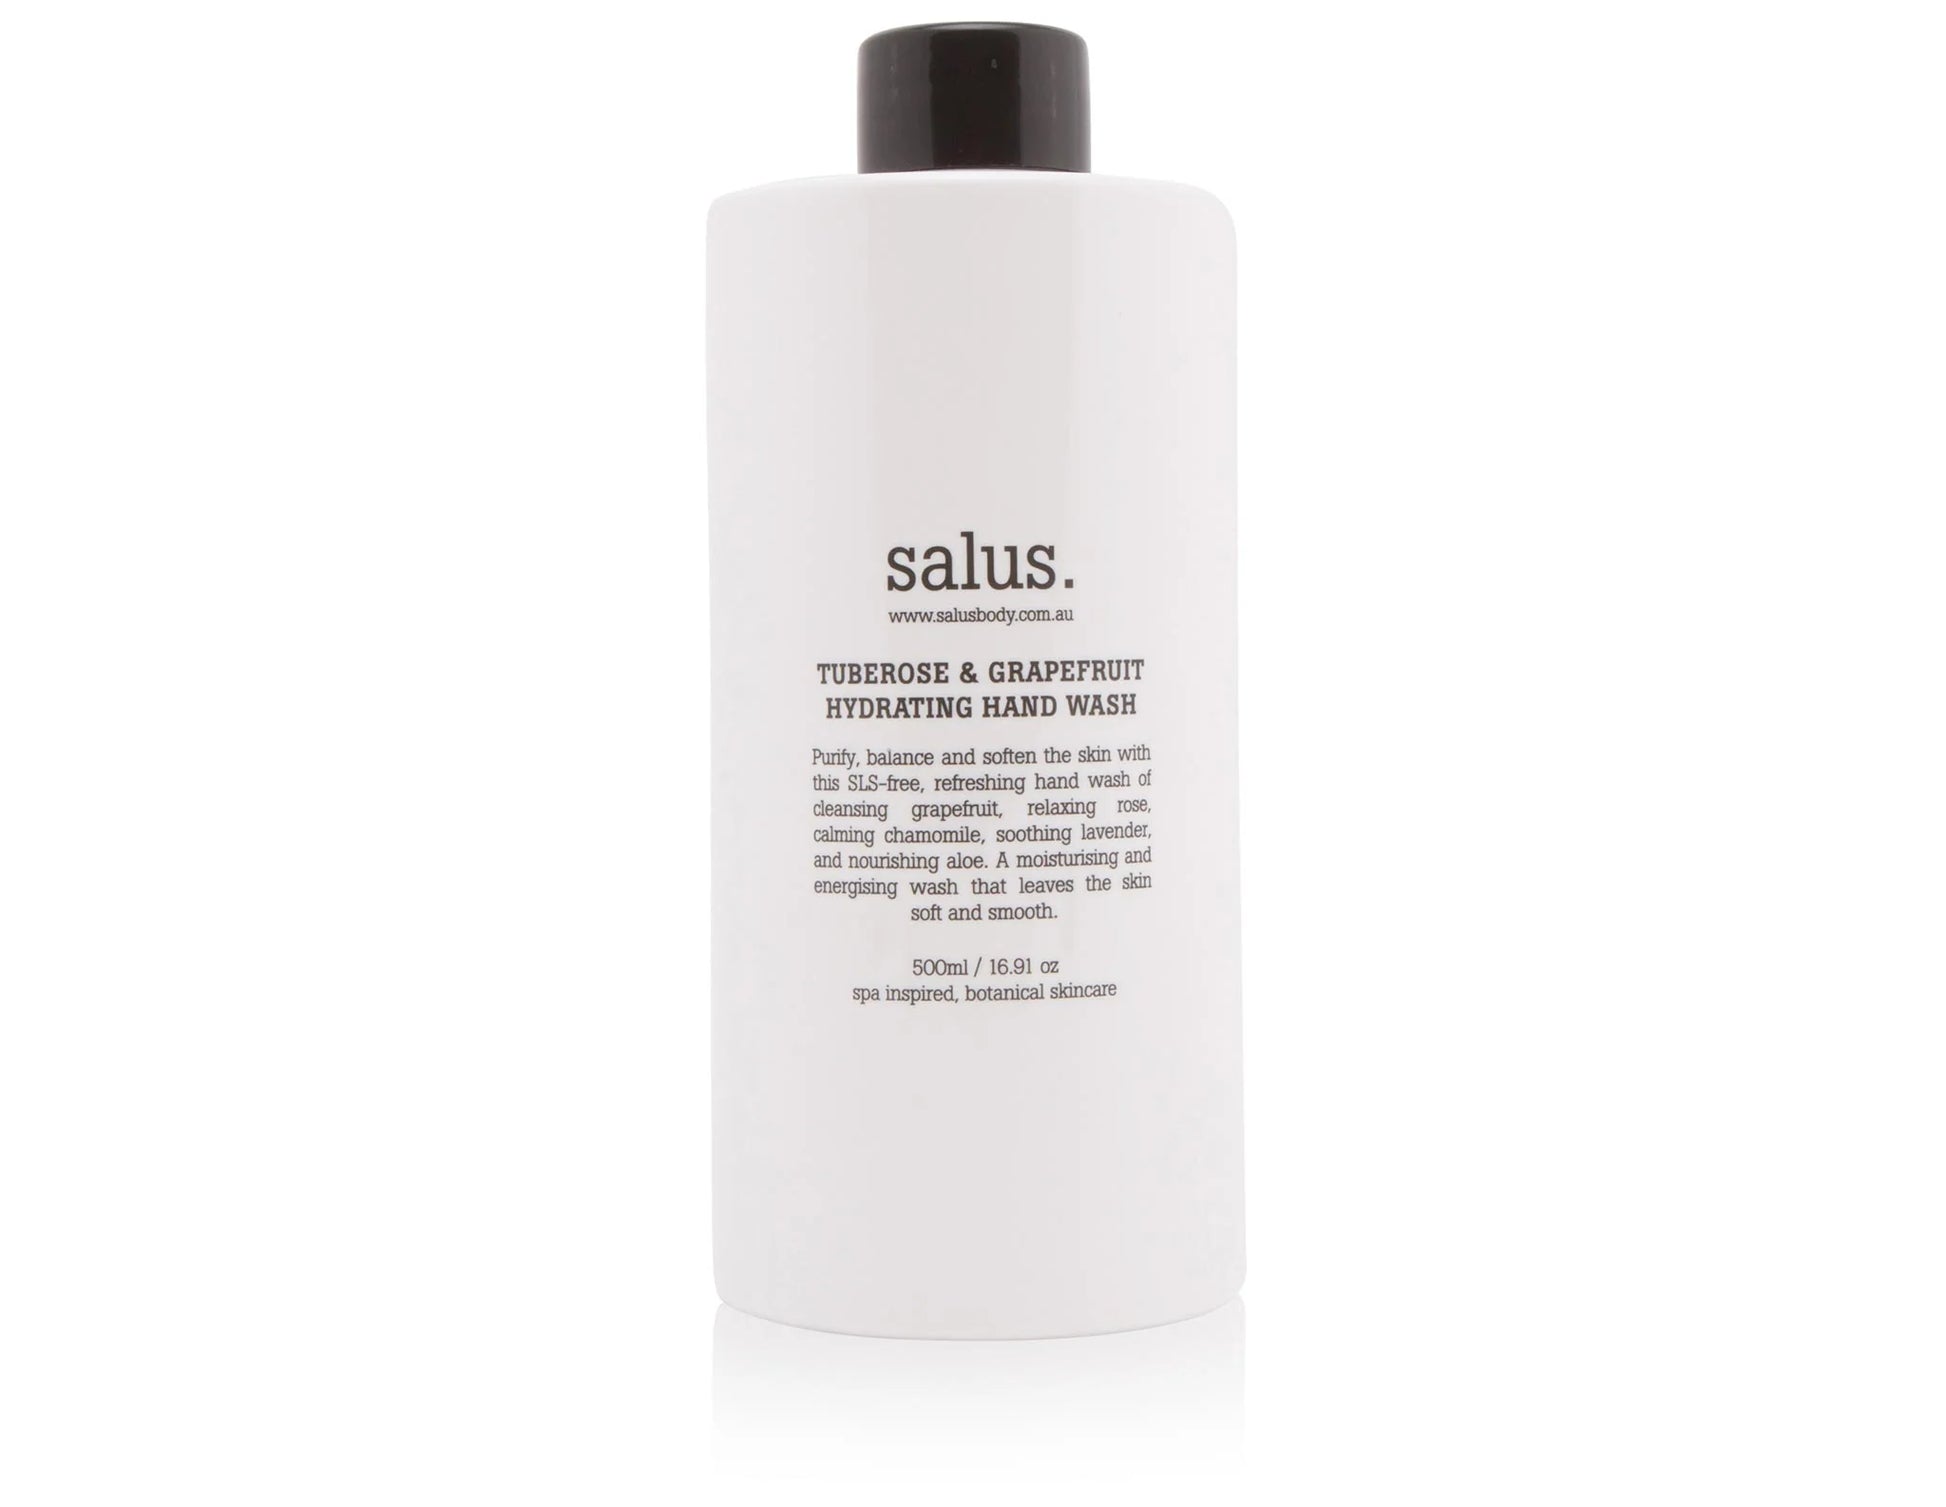 Salus Tuberose & Grapefruit Hand Wash 500ml REFILL Eclectopia Gifts and Specialty Homewares 